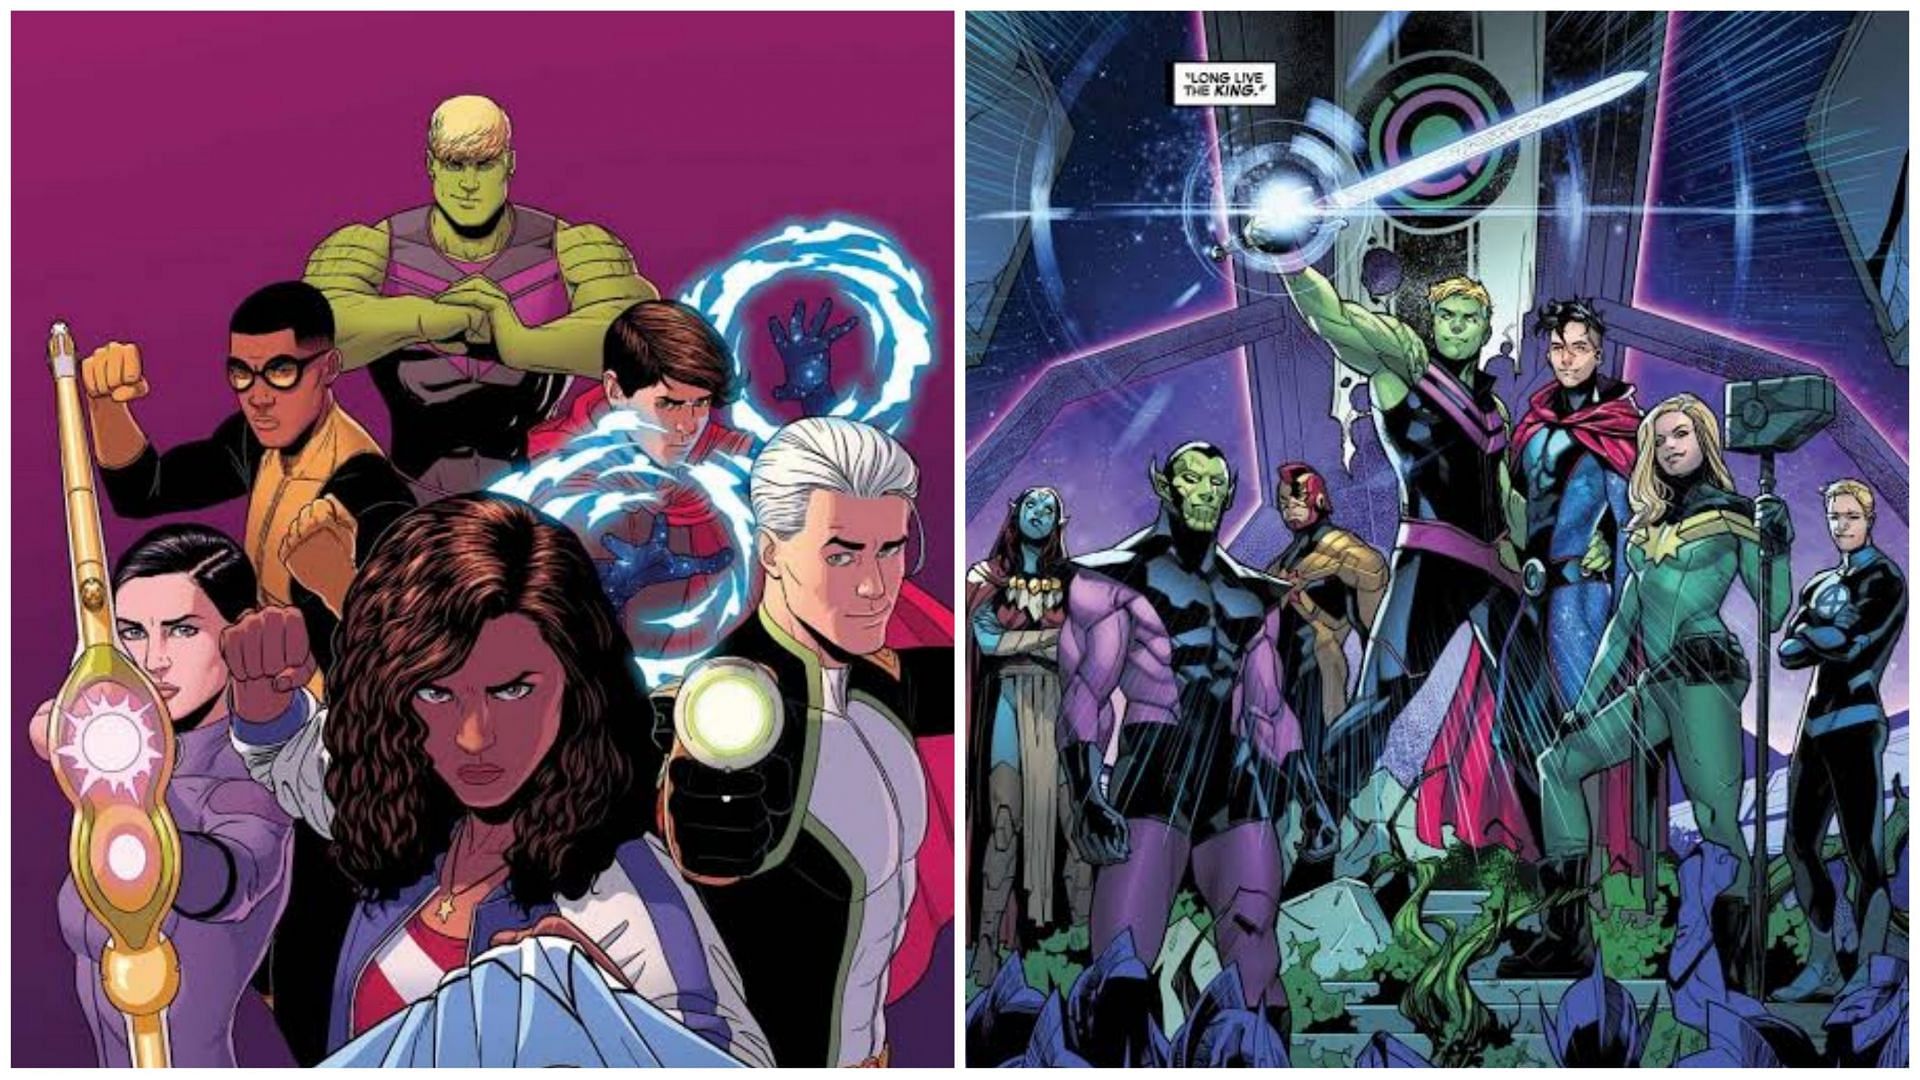 The Young Avengers (Images via Marvel Comics)